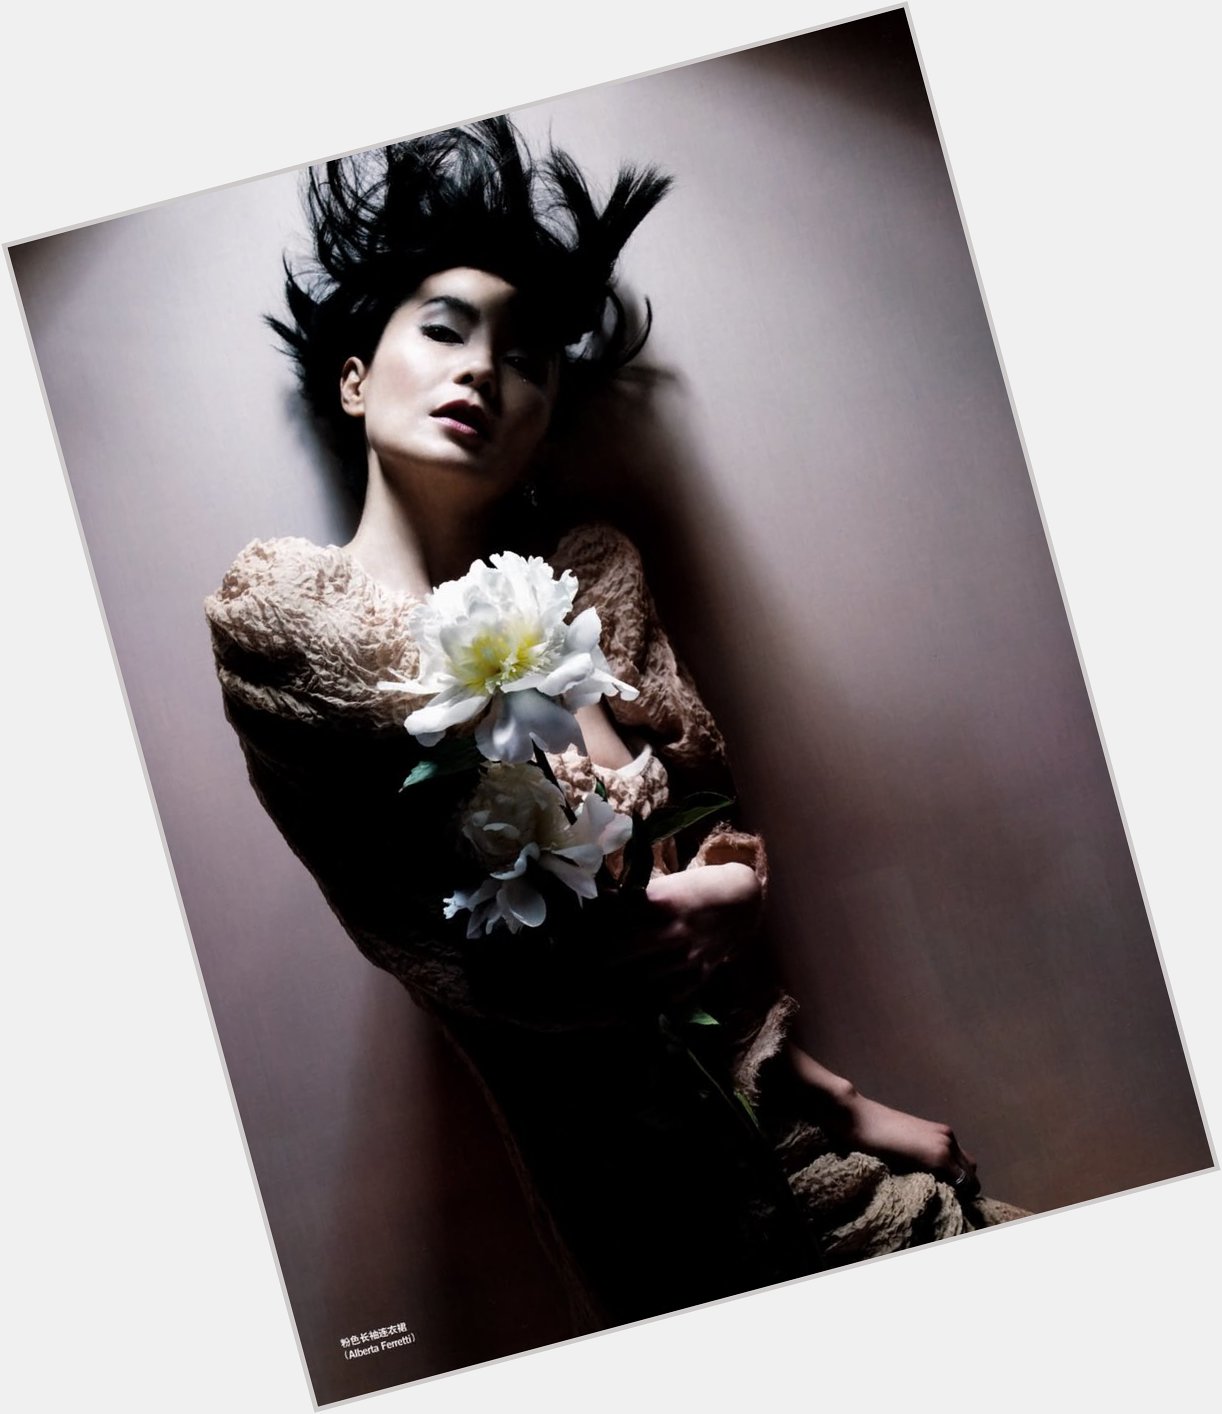 Happy birthday Maggie Cheung! A great portrait by Nick Knight for Vogue, 2009 